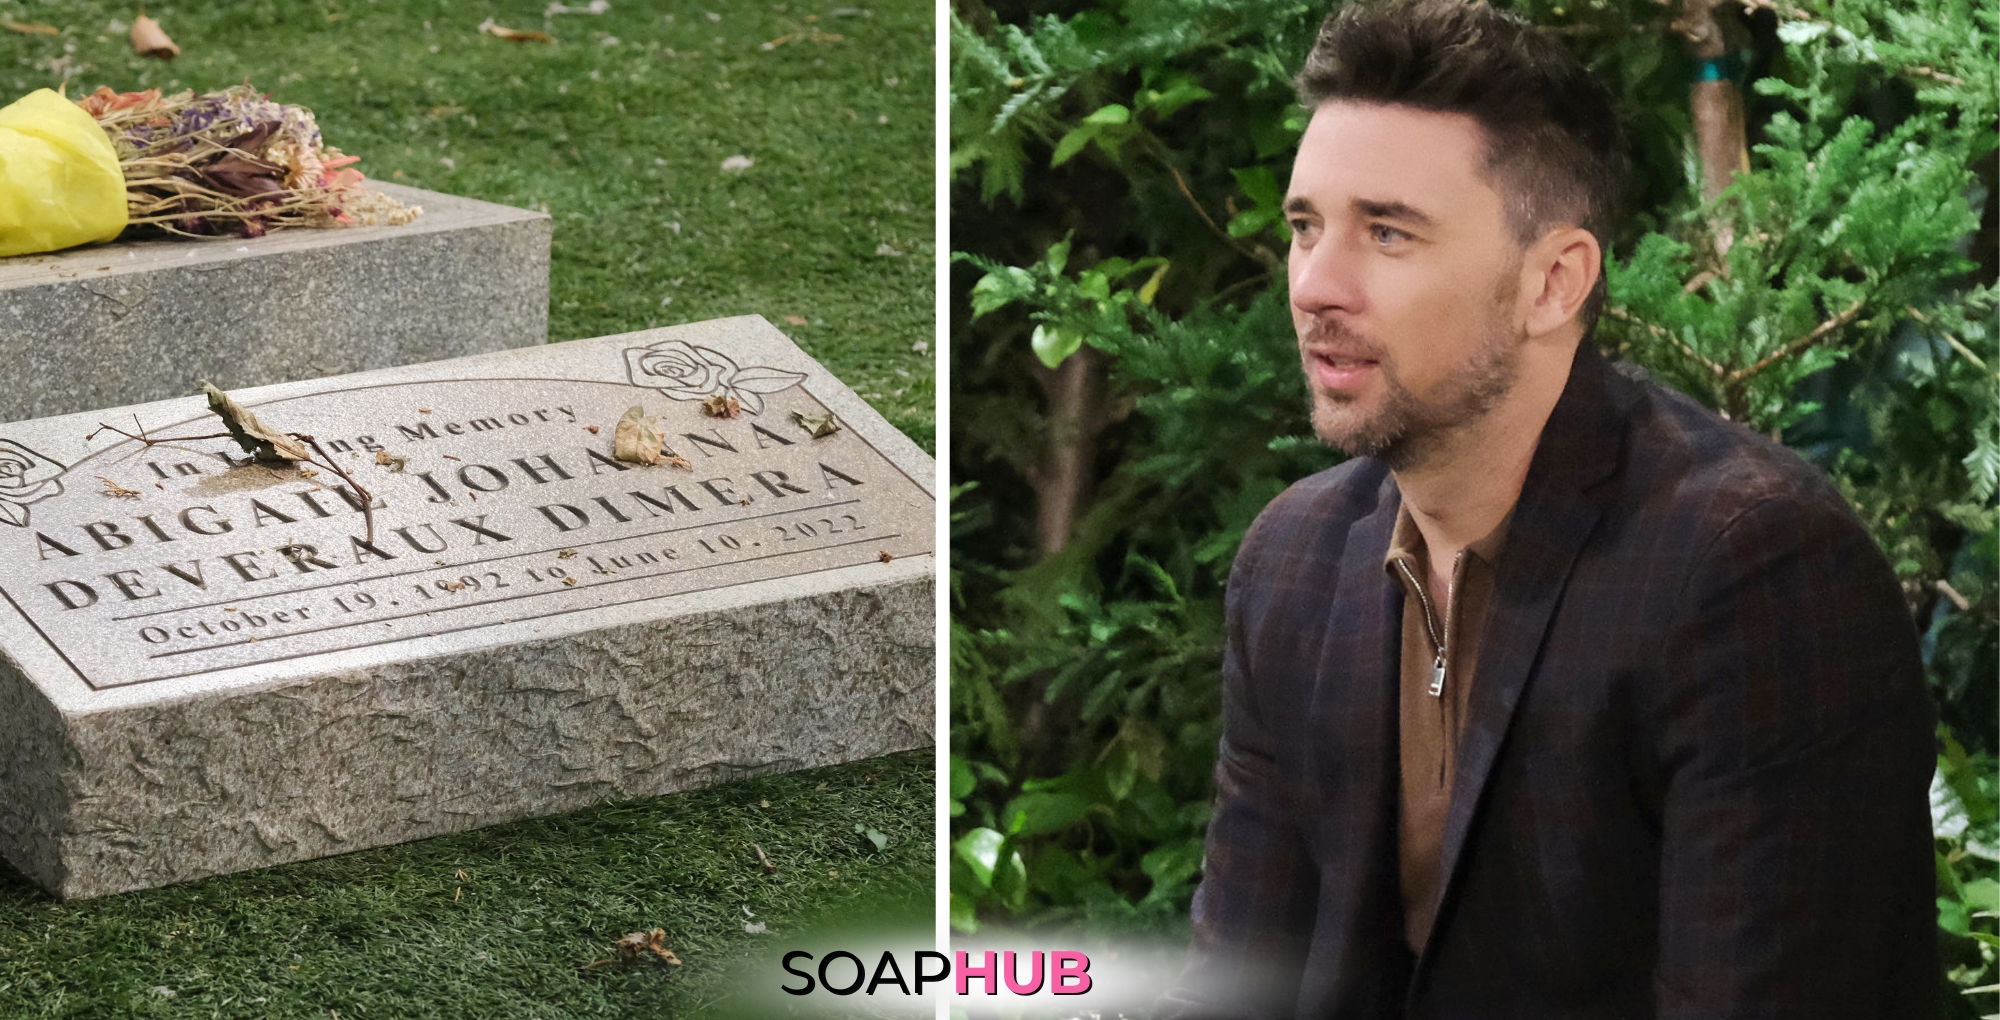 Days of our Lives spoilers for April 2 feature Chad with the Soap Hub logo across the bottom.